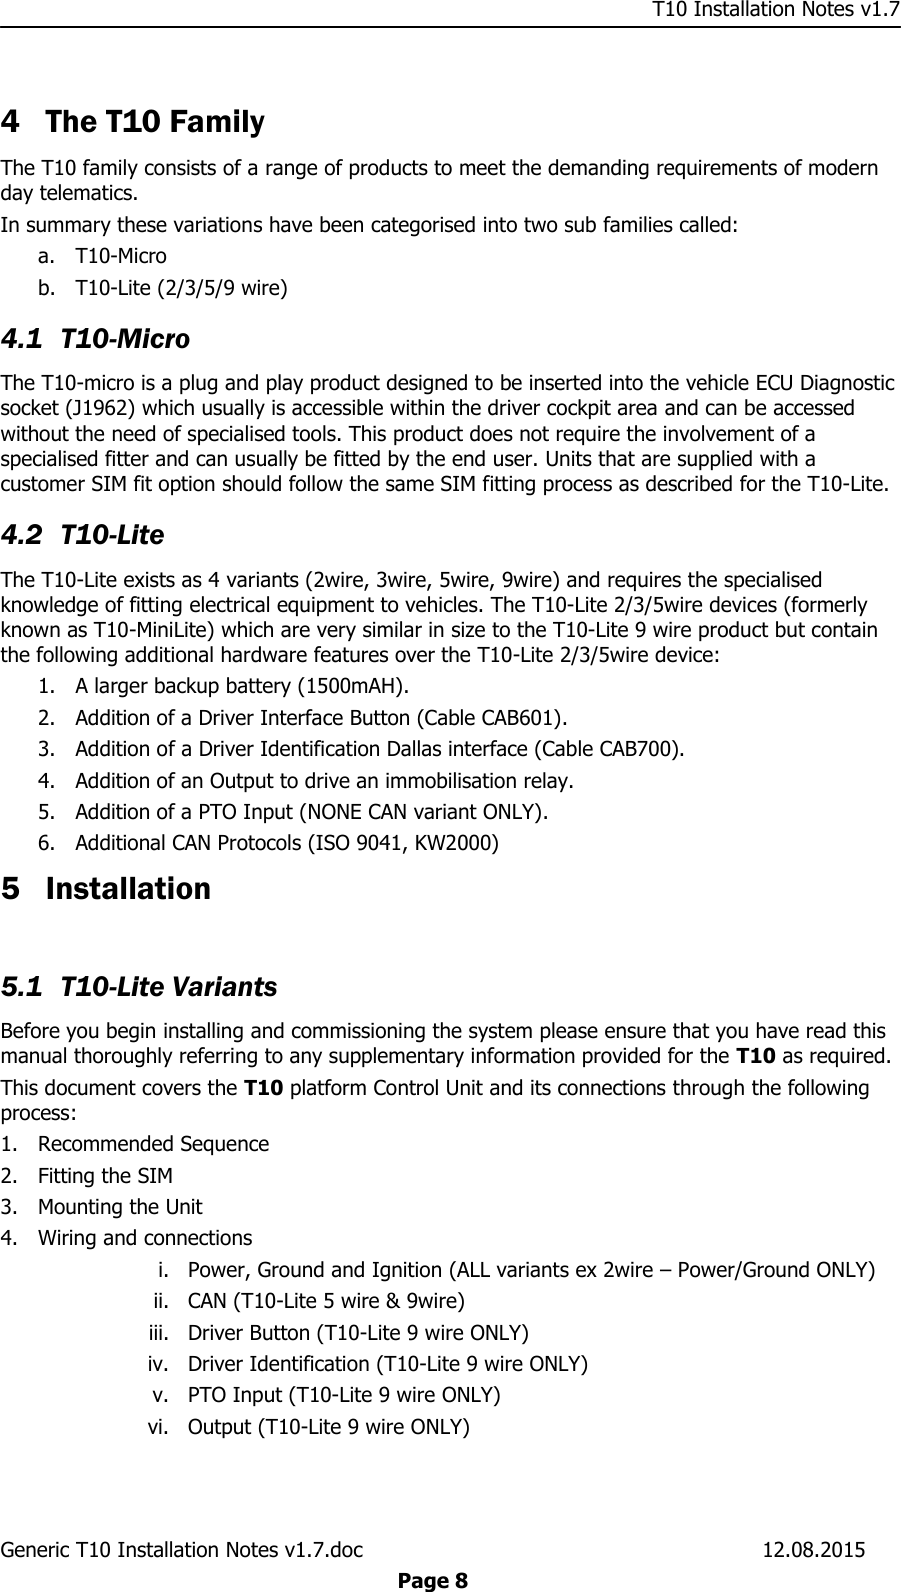     T10 Installation Notes v1.7 Generic T10 Installation Notes v1.7.doc    12.08.2015  Page 8  4 The T10 Family The T10 family consists of a range of products to meet the demanding requirements of modern day telematics. In summary these variations have been categorised into two sub families called: a. T10-Micro b. T10-Lite (2/3/5/9 wire) 4.1 T10-Micro The T10-micro is a plug and play product designed to be inserted into the vehicle ECU Diagnostic socket (J1962) which usually is accessible within the driver cockpit area and can be accessed without the need of specialised tools. This product does not require the involvement of a specialised fitter and can usually be fitted by the end user. Units that are supplied with a customer SIM fit option should follow the same SIM fitting process as described for the T10-Lite. 4.2 T10-Lite The T10-Lite exists as 4 variants (2wire, 3wire, 5wire, 9wire) and requires the specialised knowledge of fitting electrical equipment to vehicles. The T10-Lite 2/3/5wire devices (formerly known as T10-MiniLite) which are very similar in size to the T10-Lite 9 wire product but contain the following additional hardware features over the T10-Lite 2/3/5wire device: 1. A larger backup battery (1500mAH). 2. Addition of a Driver Interface Button (Cable CAB601). 3. Addition of a Driver Identification Dallas interface (Cable CAB700). 4. Addition of an Output to drive an immobilisation relay. 5. Addition of a PTO Input (NONE CAN variant ONLY). 6. Additional CAN Protocols (ISO 9041, KW2000) 5 Installation  5.1 T10-Lite Variants Before you begin installing and commissioning the system please ensure that you have read this manual thoroughly referring to any supplementary information provided for the T10 as required. This document covers the T10 platform Control Unit and its connections through the following process: 1. Recommended Sequence 2. Fitting the SIM 3. Mounting the Unit 4. Wiring and connections i. Power, Ground and Ignition (ALL variants ex 2wire – Power/Ground ONLY) ii. CAN (T10-Lite 5 wire &amp; 9wire) iii. Driver Button (T10-Lite 9 wire ONLY) iv. Driver Identification (T10-Lite 9 wire ONLY) v. PTO Input (T10-Lite 9 wire ONLY) vi. Output (T10-Lite 9 wire ONLY) 